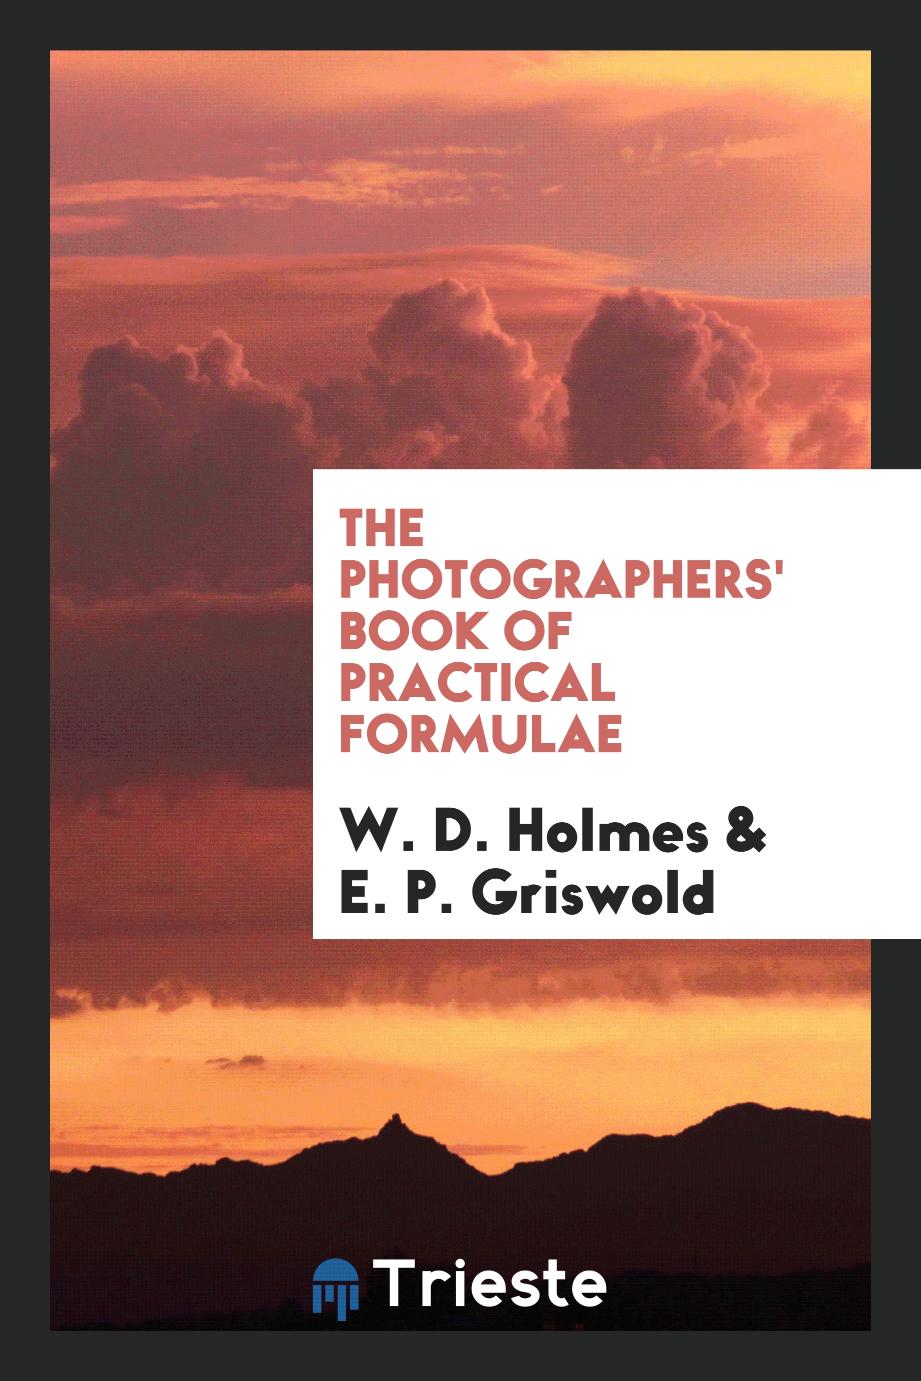 The photographers' book of practical formulae